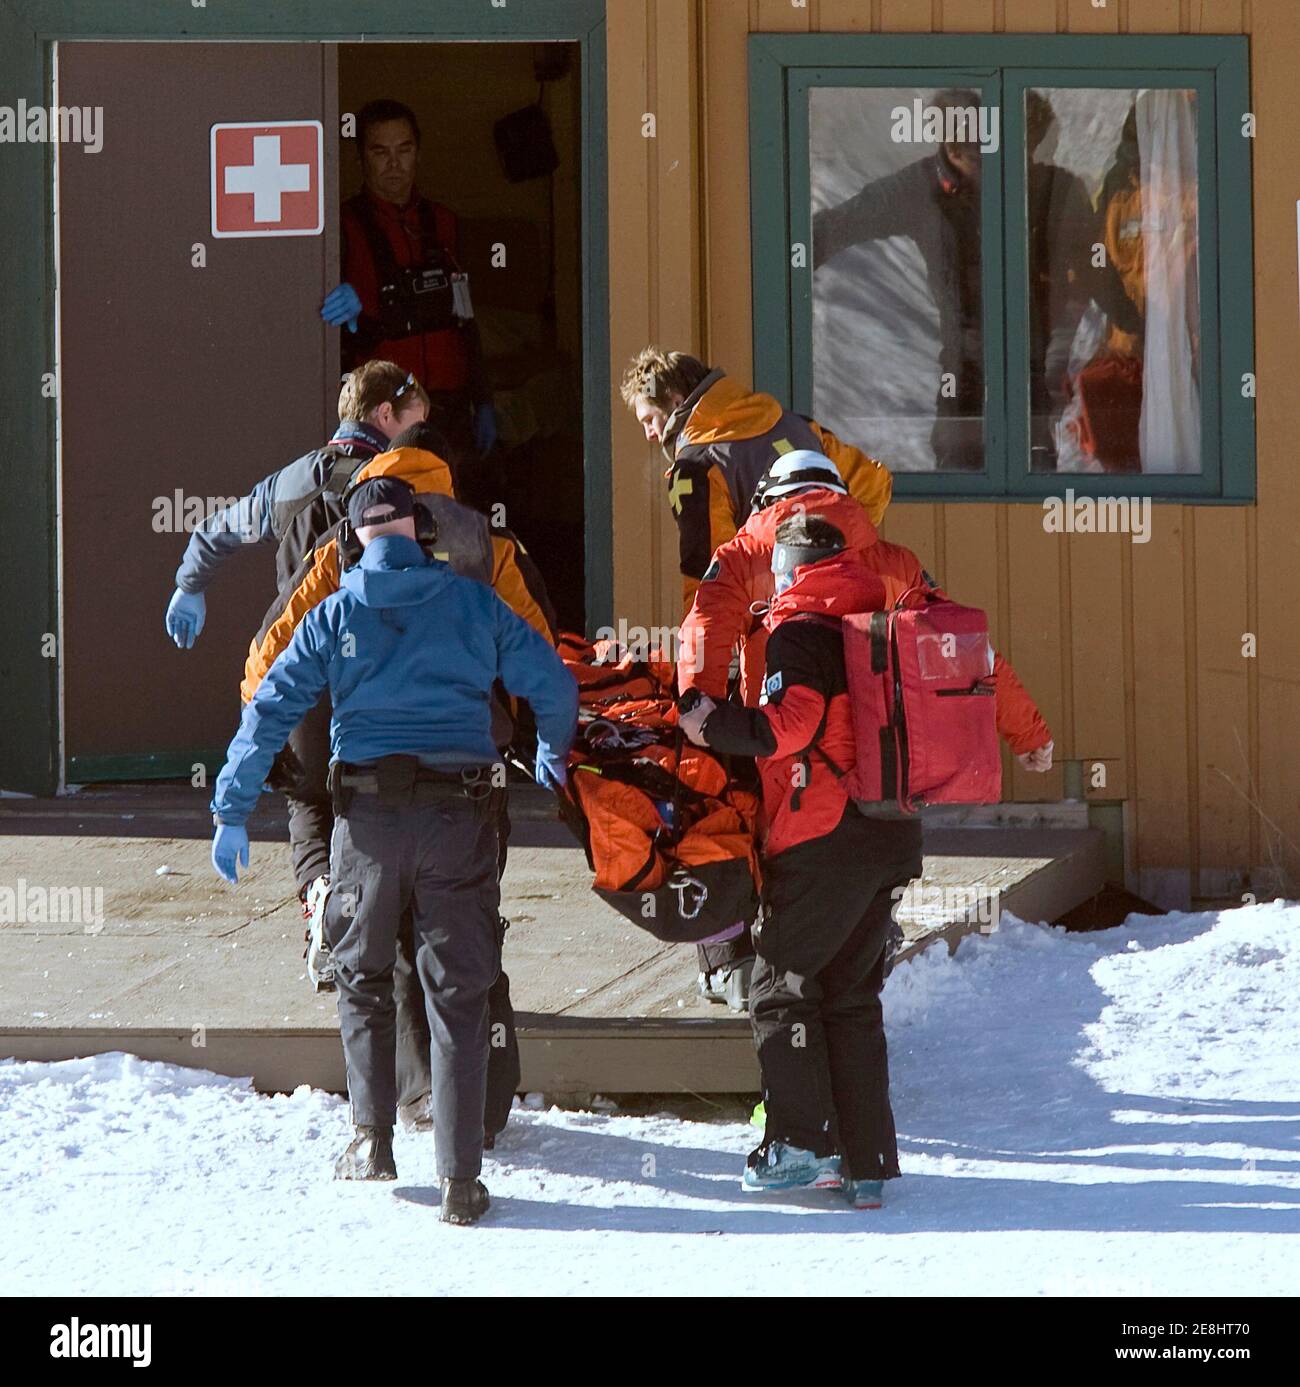 Medics carry Tamara Wolf of Switzerland following her airlift down the ski hill after crashing during the women's World Cup Downhill training in Lake Louise, Alberta, November 29, 2007.     REUTERS/Andy Clark     (CANADA) Stock Photo